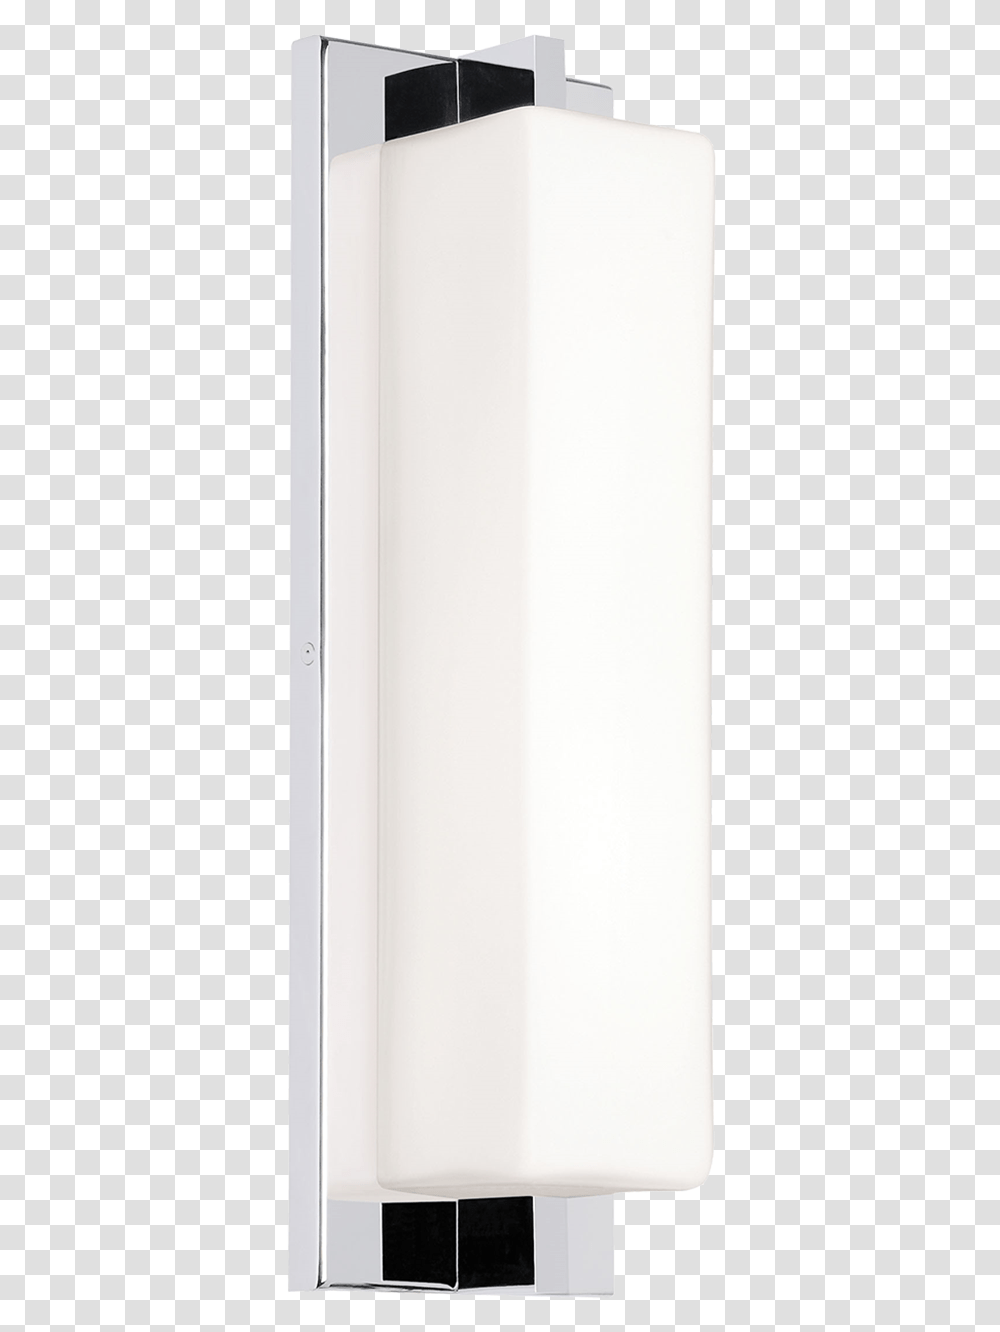 Lampshade, Refrigerator, Appliance, Electronics, Home Decor Transparent Png